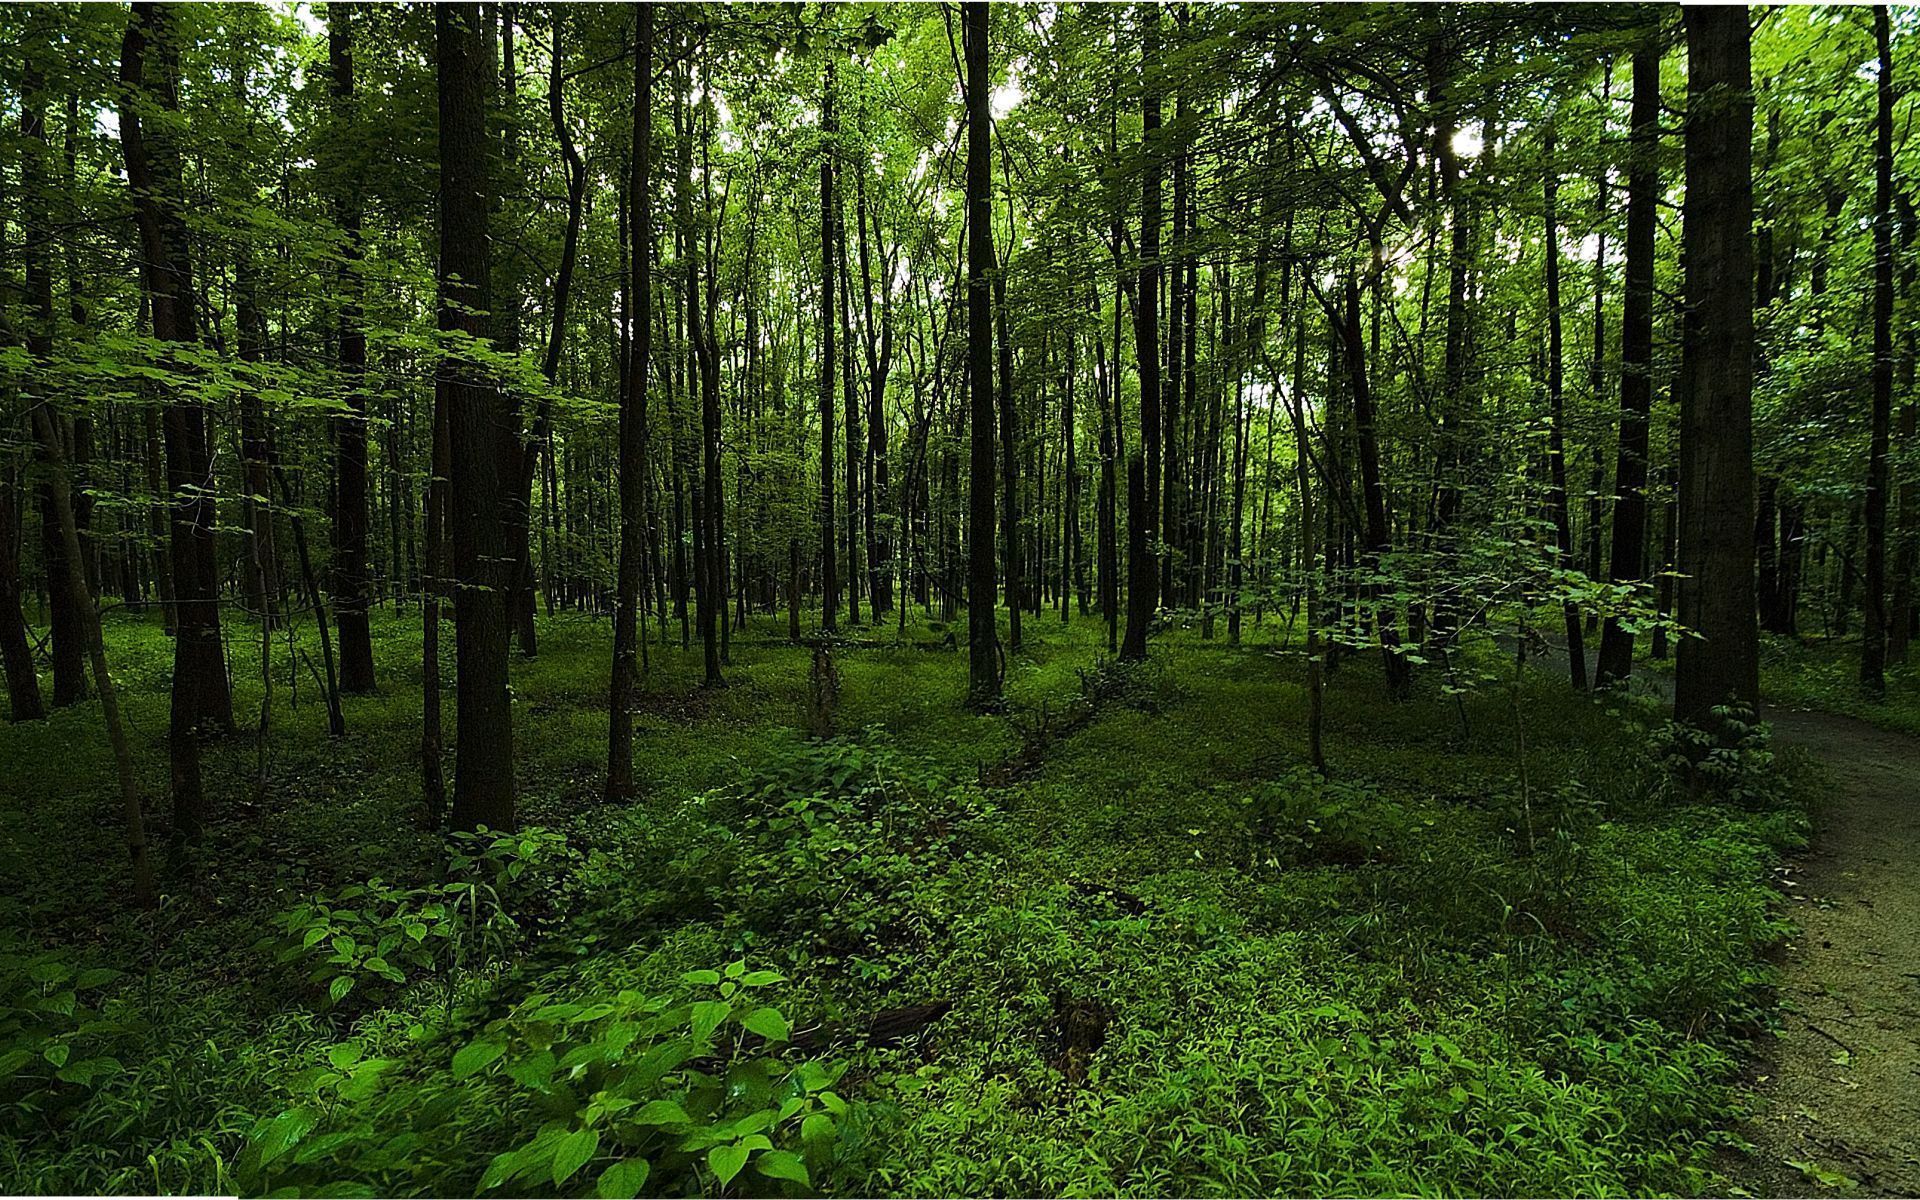 Green Forest Backgrounds